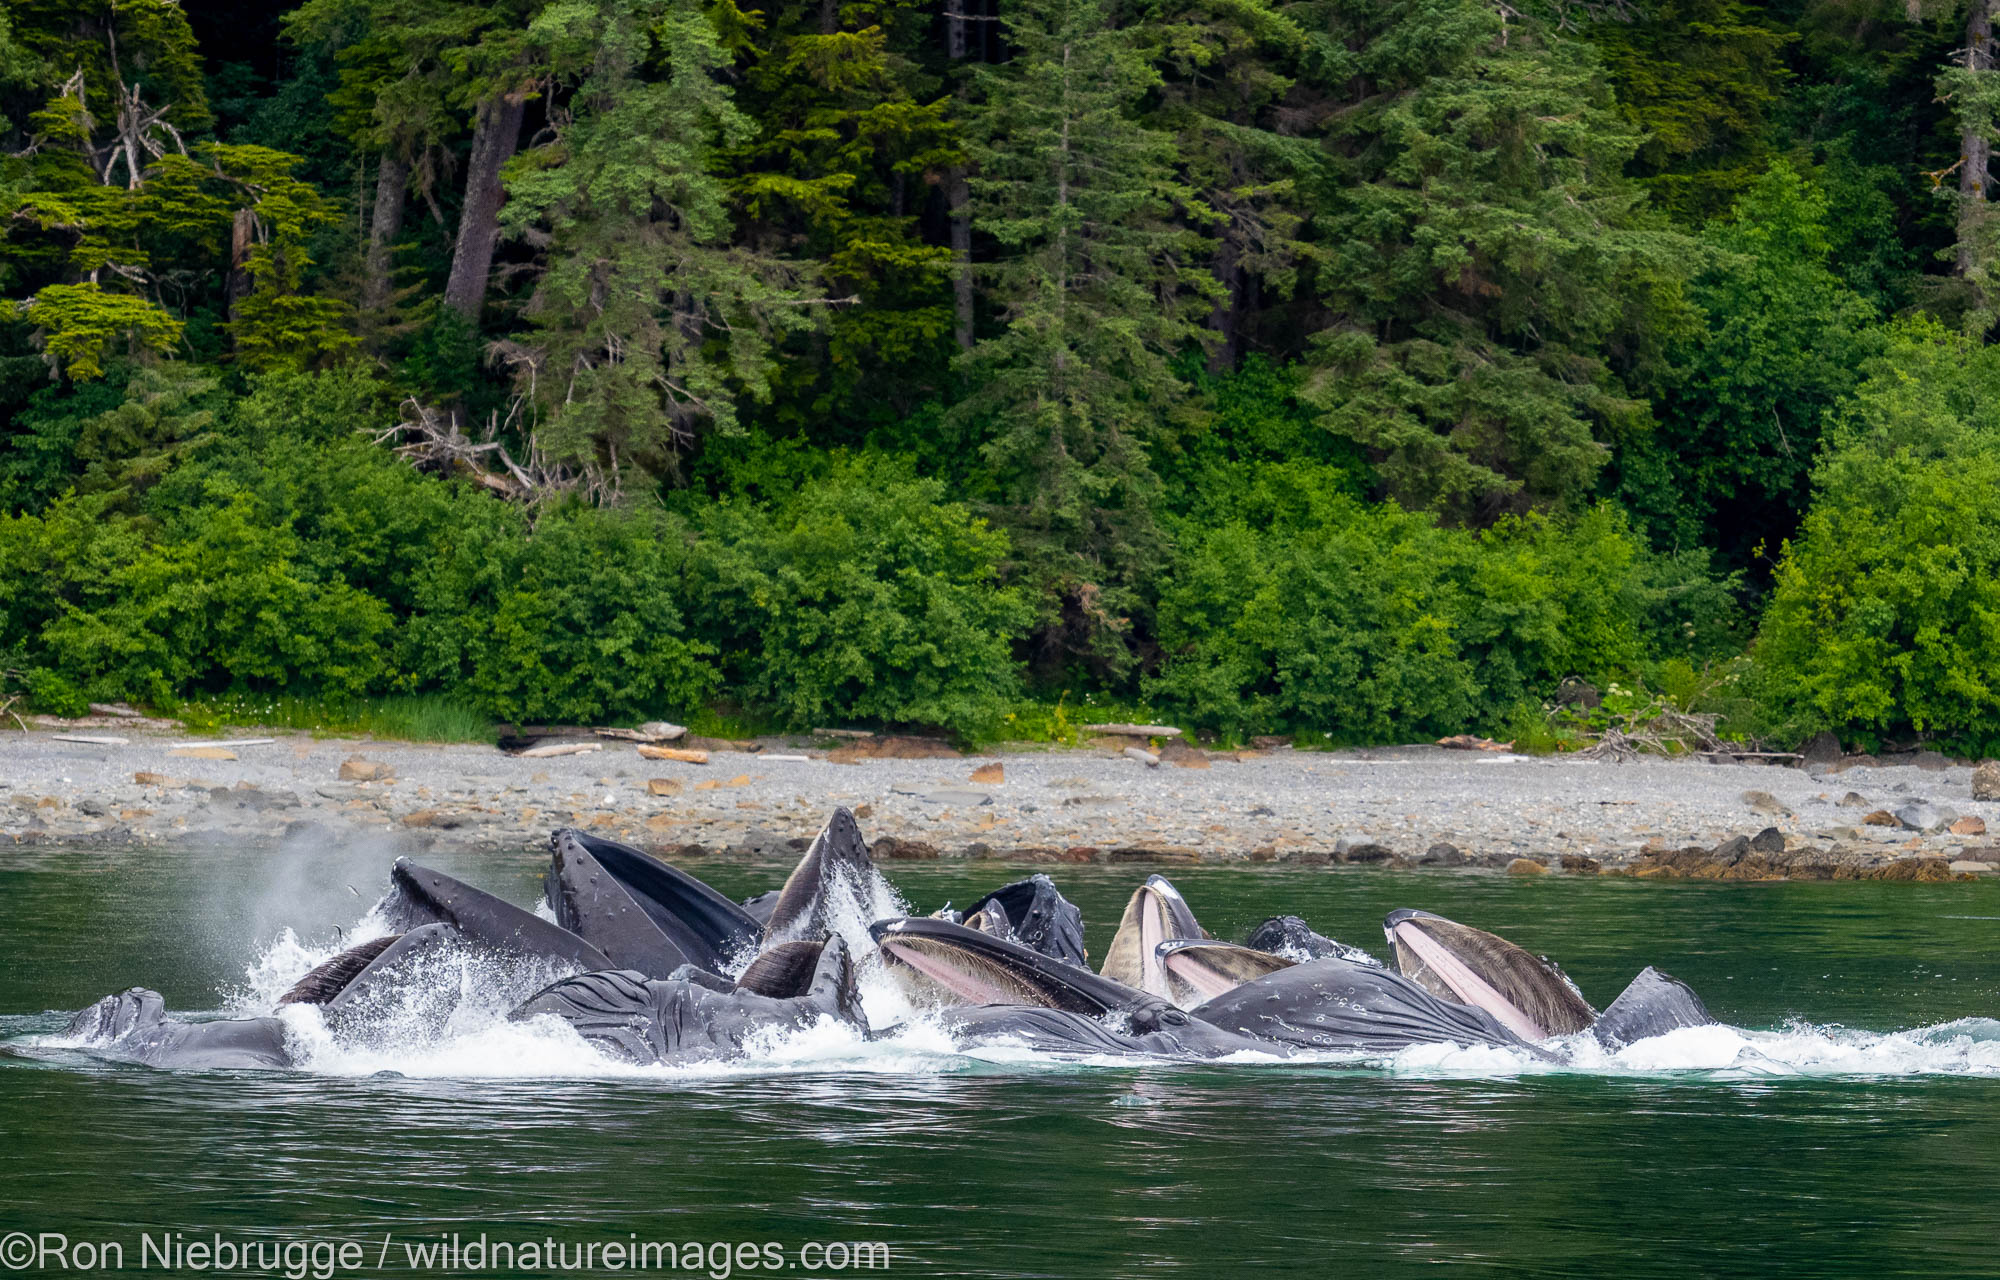 Humpback whales, Tongass National Forest, Alaska.